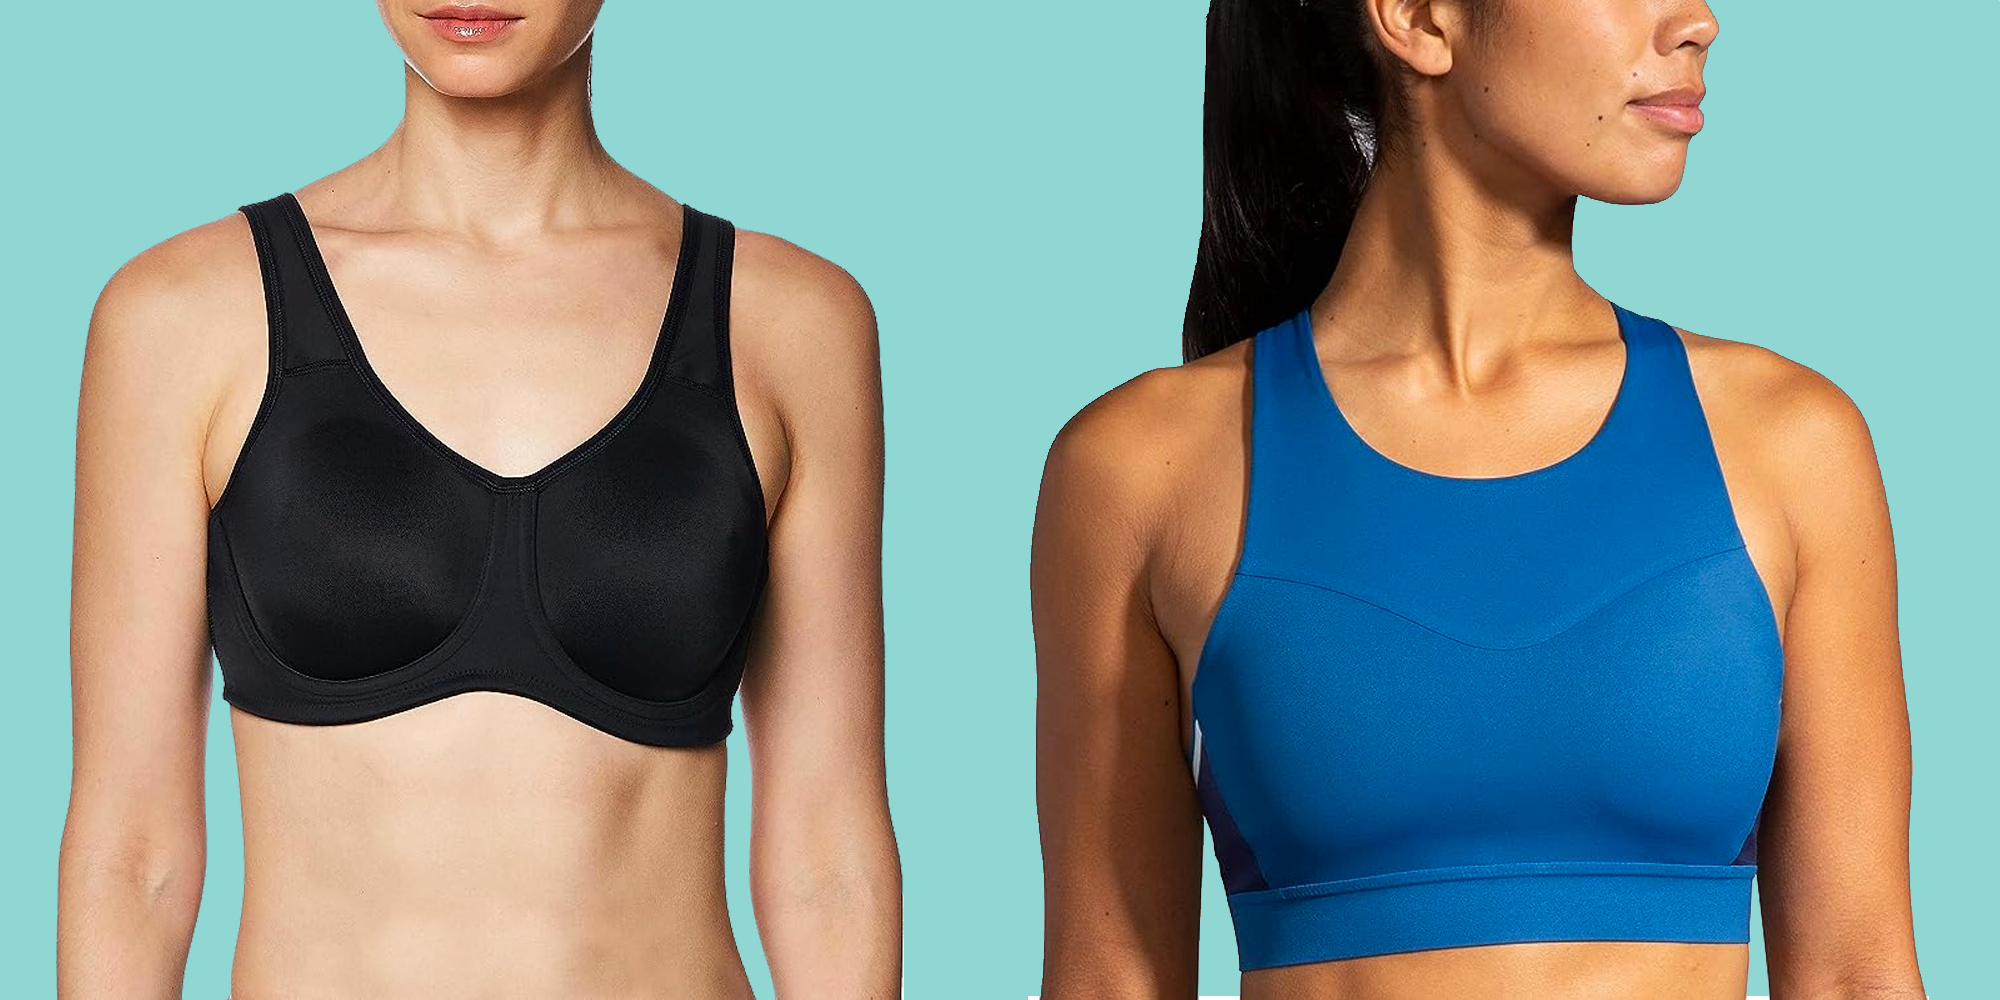 Forme Bra Review: Before and After Results Using a Posture-Correcting Bra